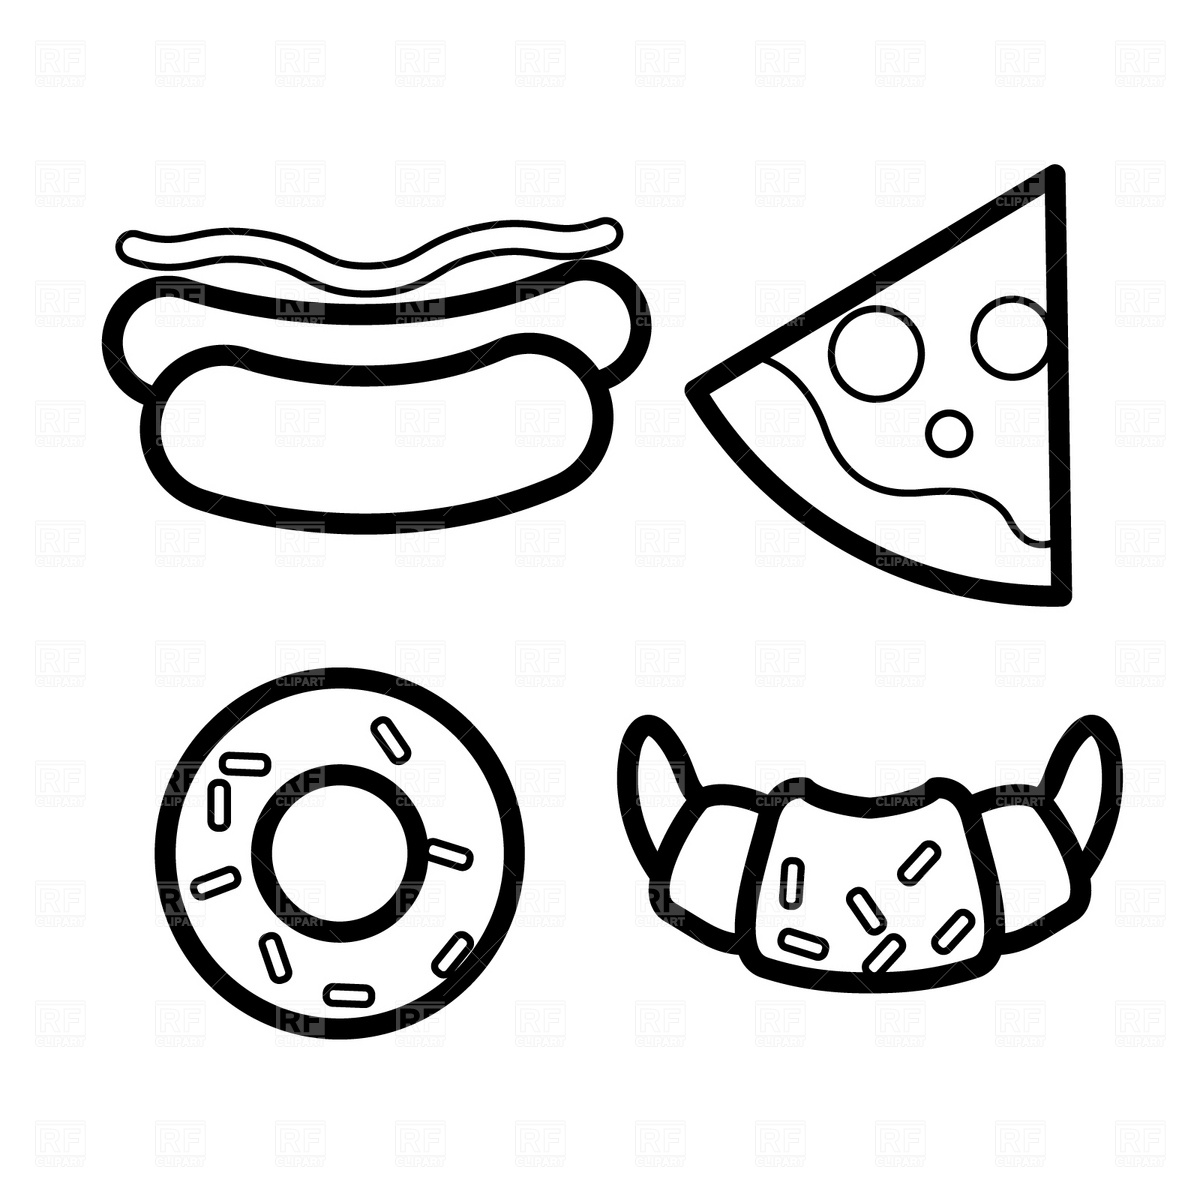 free black and white pizza clipart - photo #39